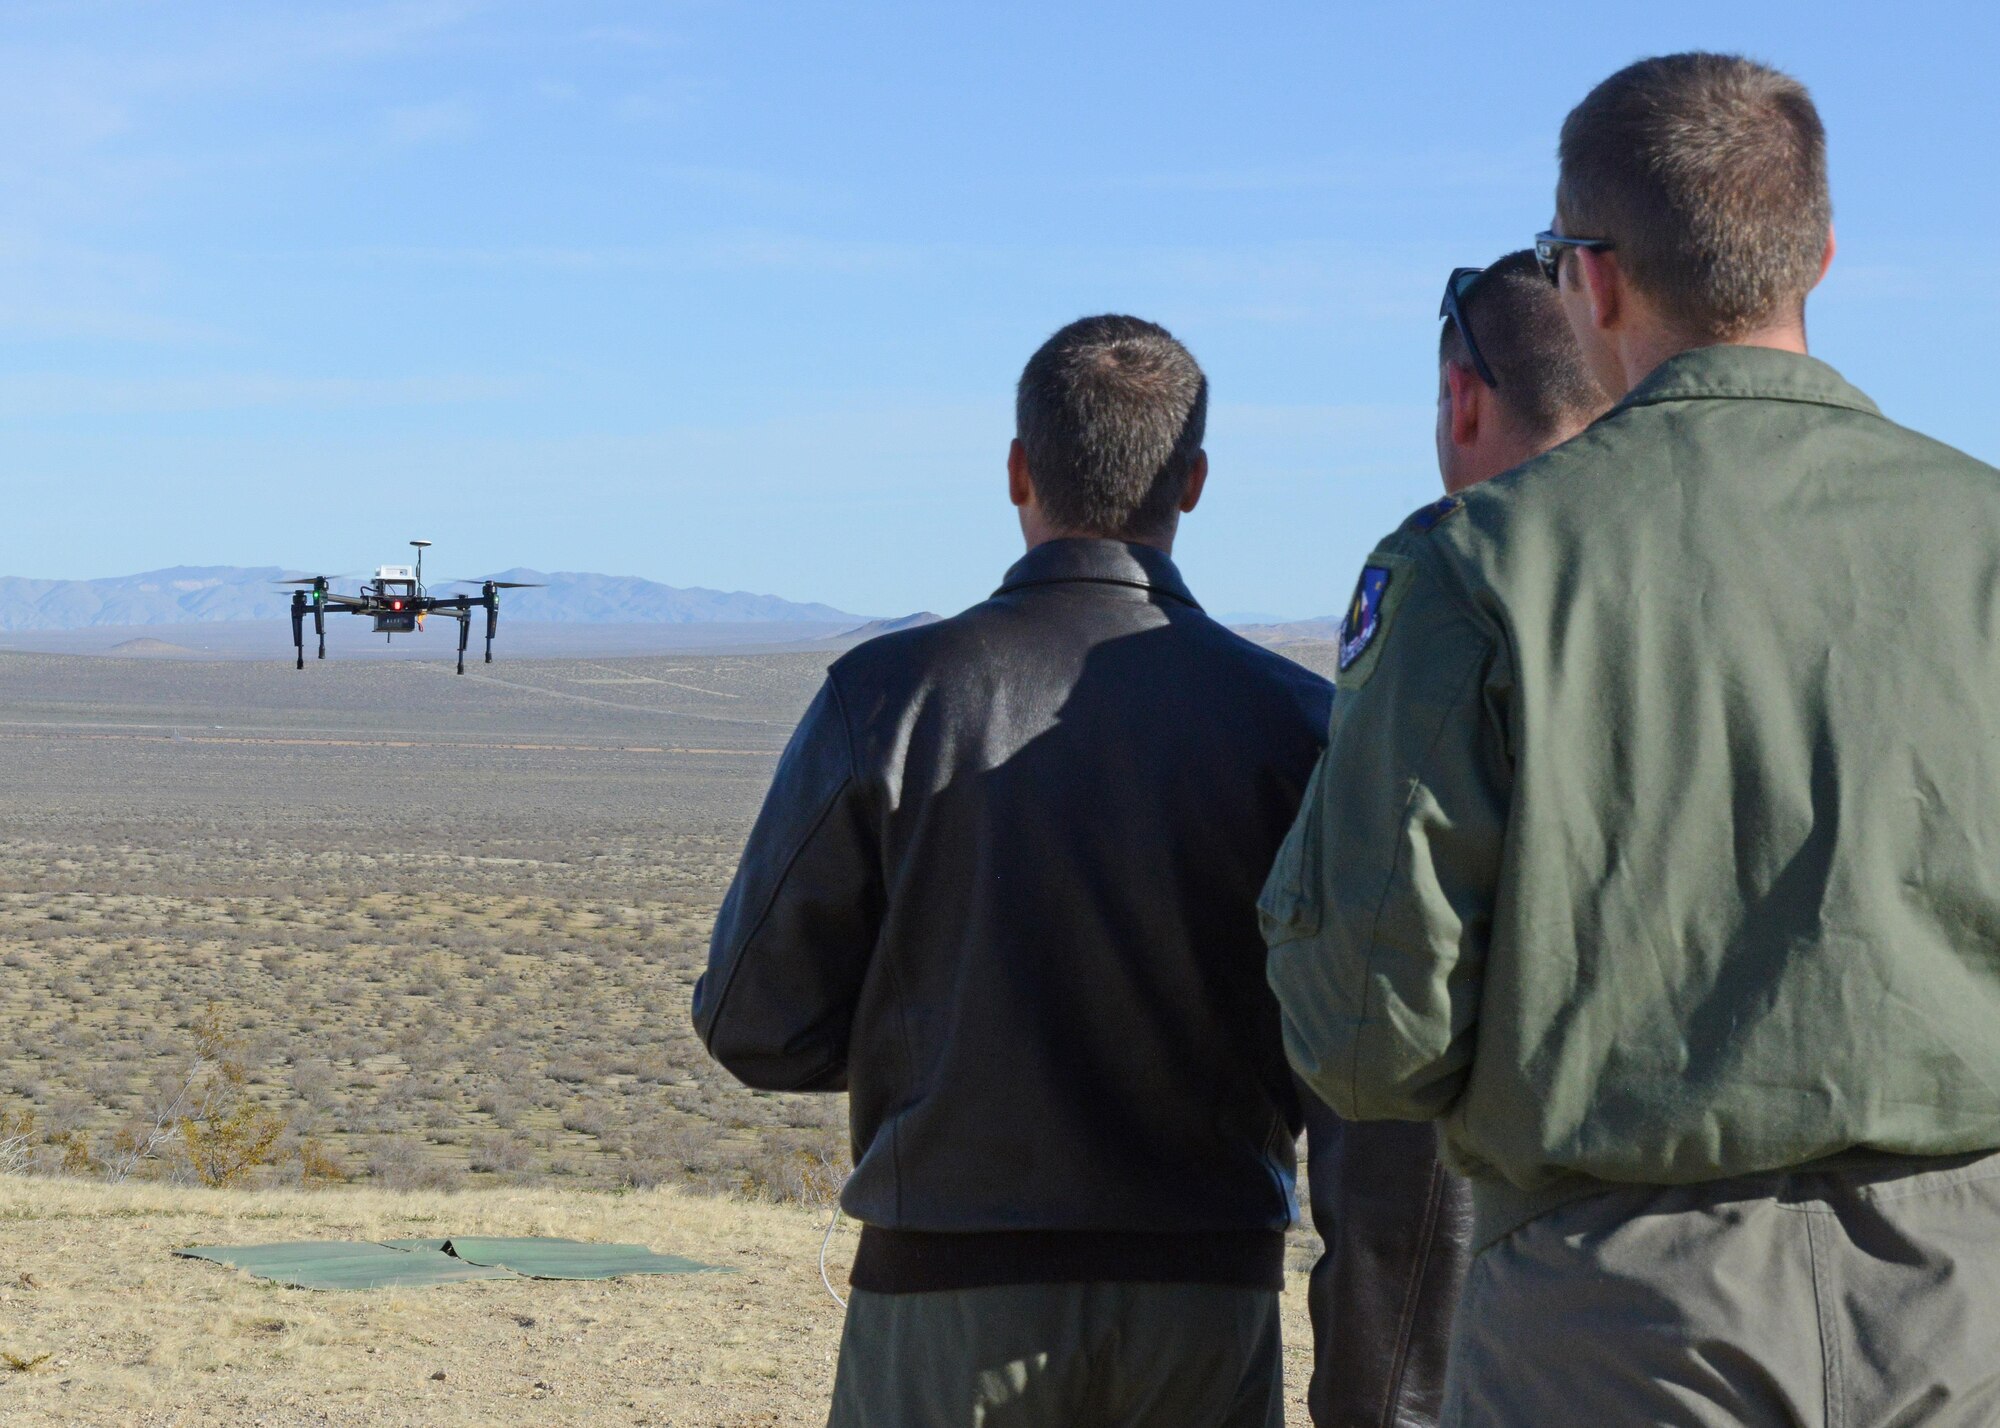 Pilots from the Emerging Technologies Combined Test Force prepare to land a quadcopter after a test sortie Feb. 13. The quadcopter was tested to see if it can perform as a flying radio frequency boresight to calibrate Edwards AFB’s telemetry antennas. (U.S. Air Force photo by Kenji Thuloweit)